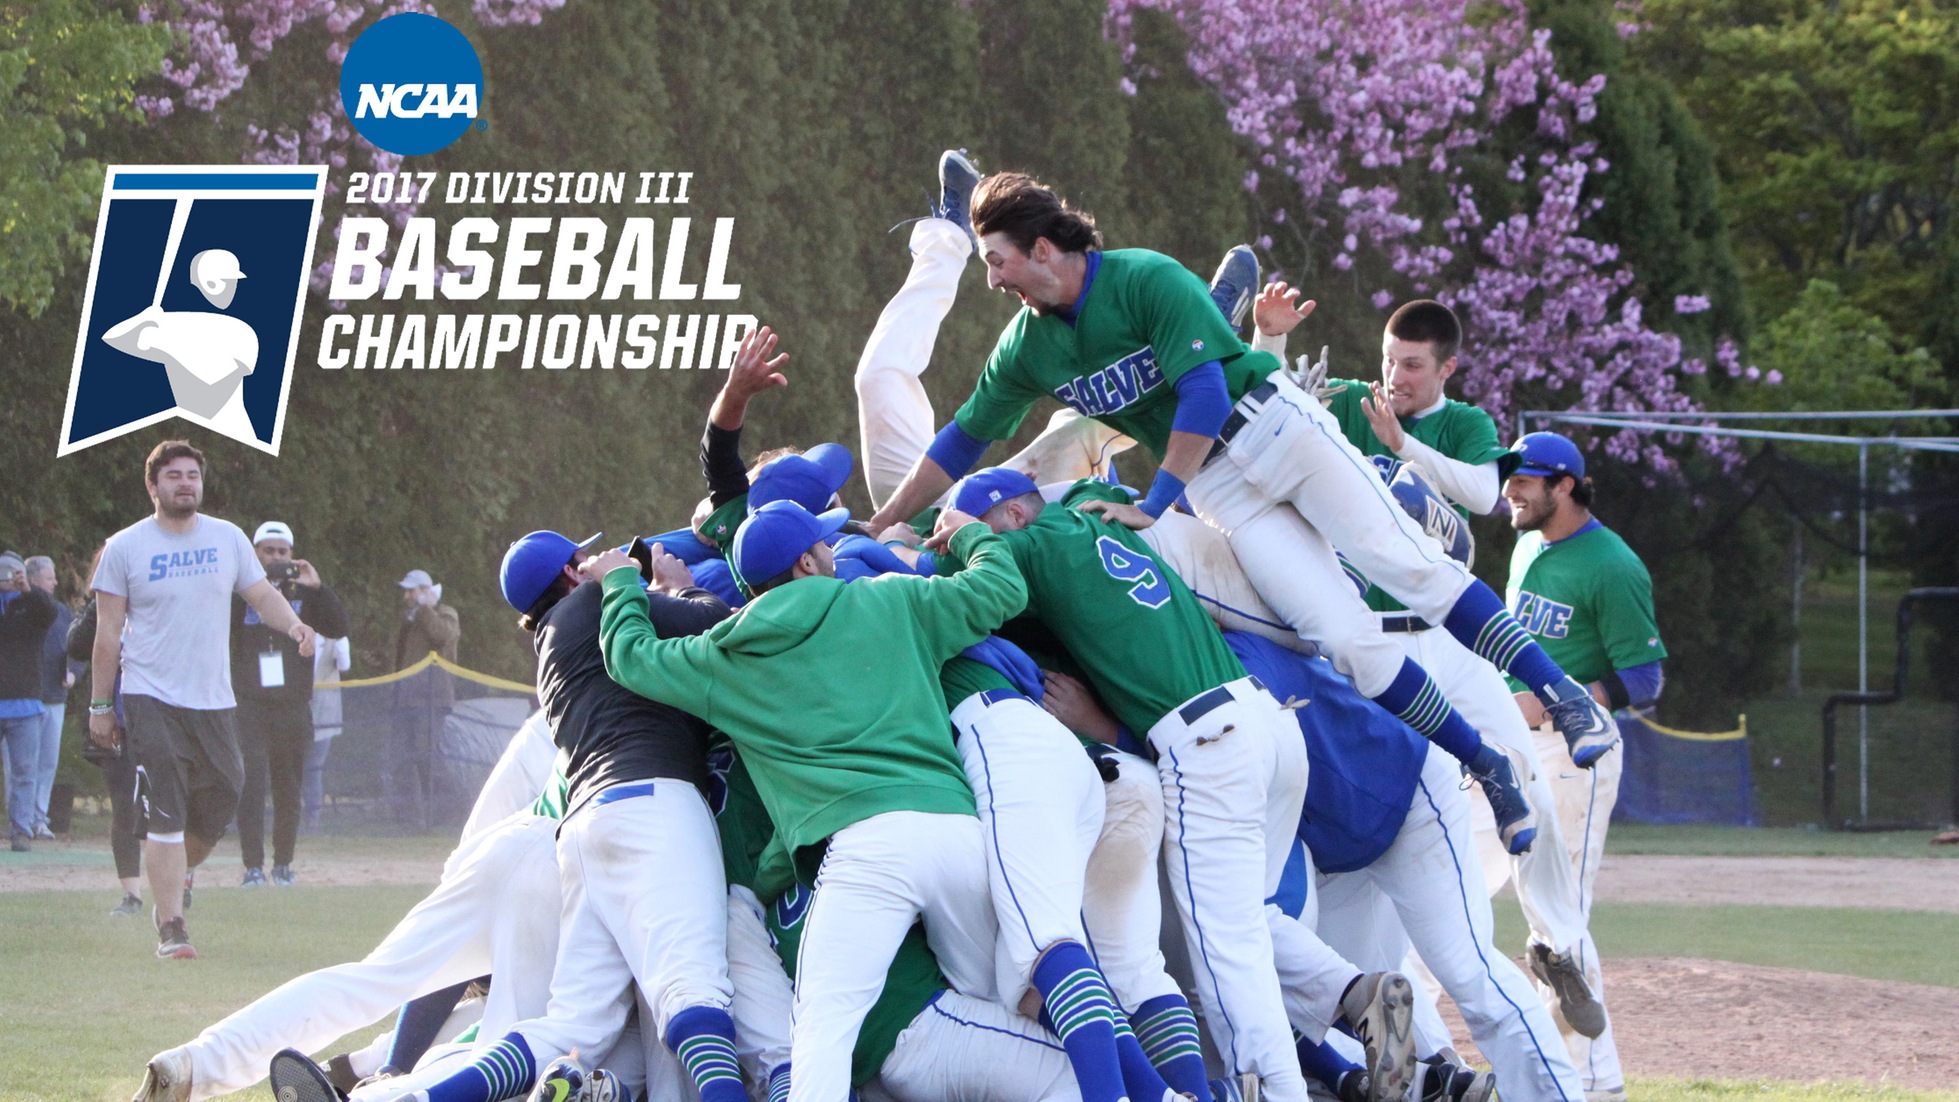 Salve Regina University baseball captured its second consecutive Commonwealth Coast Conference (CCC) championship last Friday and will begin its quest for a national title in the NCAA Regional Championships hosted by Massachusetts Maritime Academy (Thu.-Sun., May 18-21, 2017) at Harwich, Mass. (Original photo courtesy of Newport Daily News/Kayla Ebner)